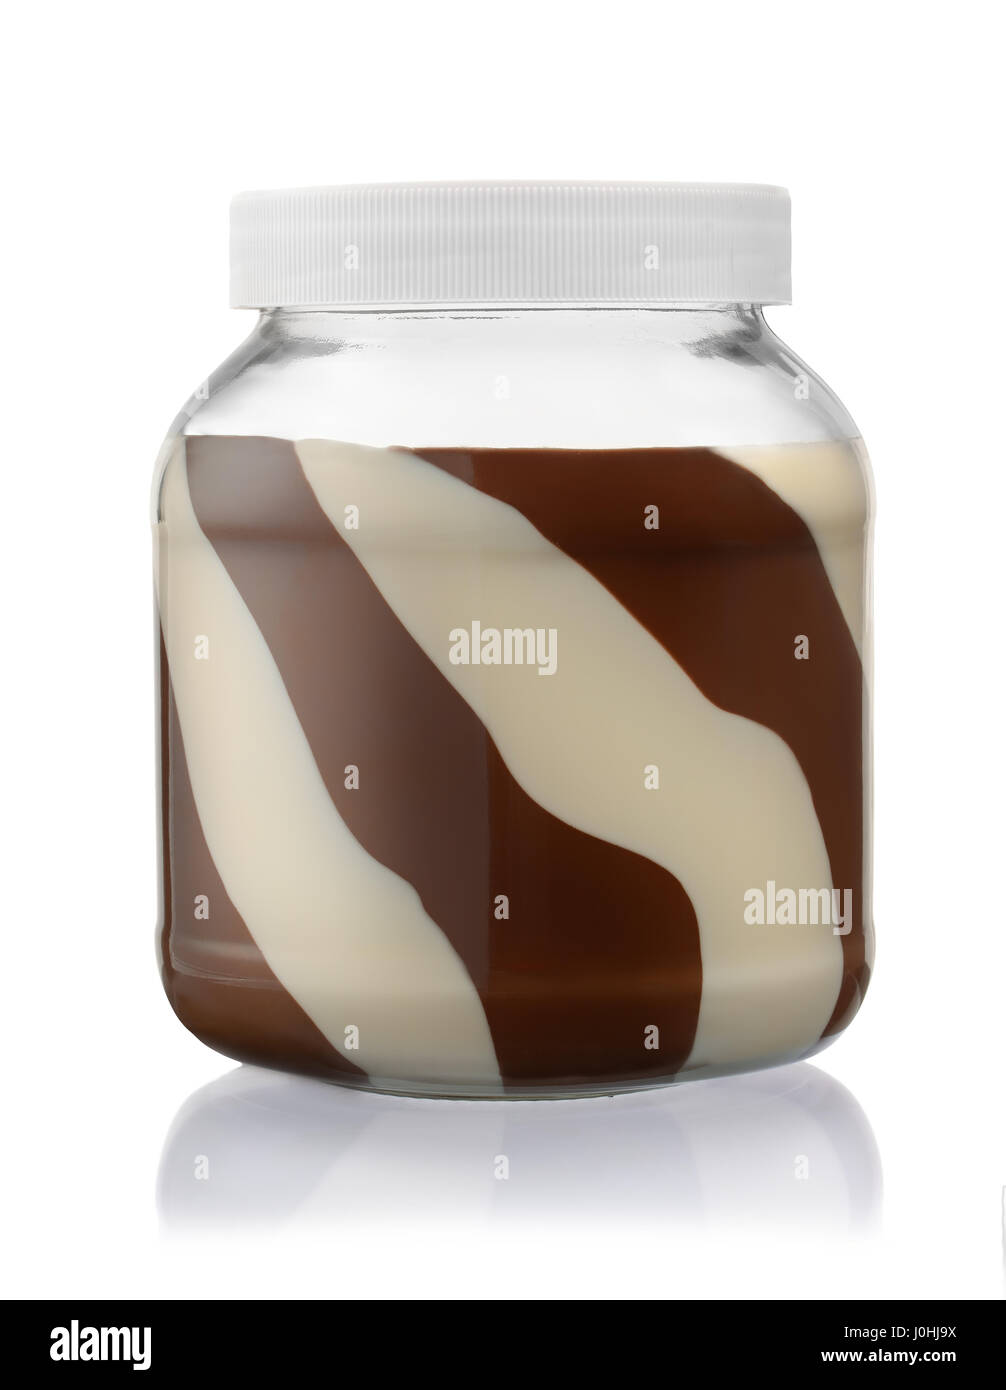 Front view of chocolate spread jar isolated on white Stock Photo